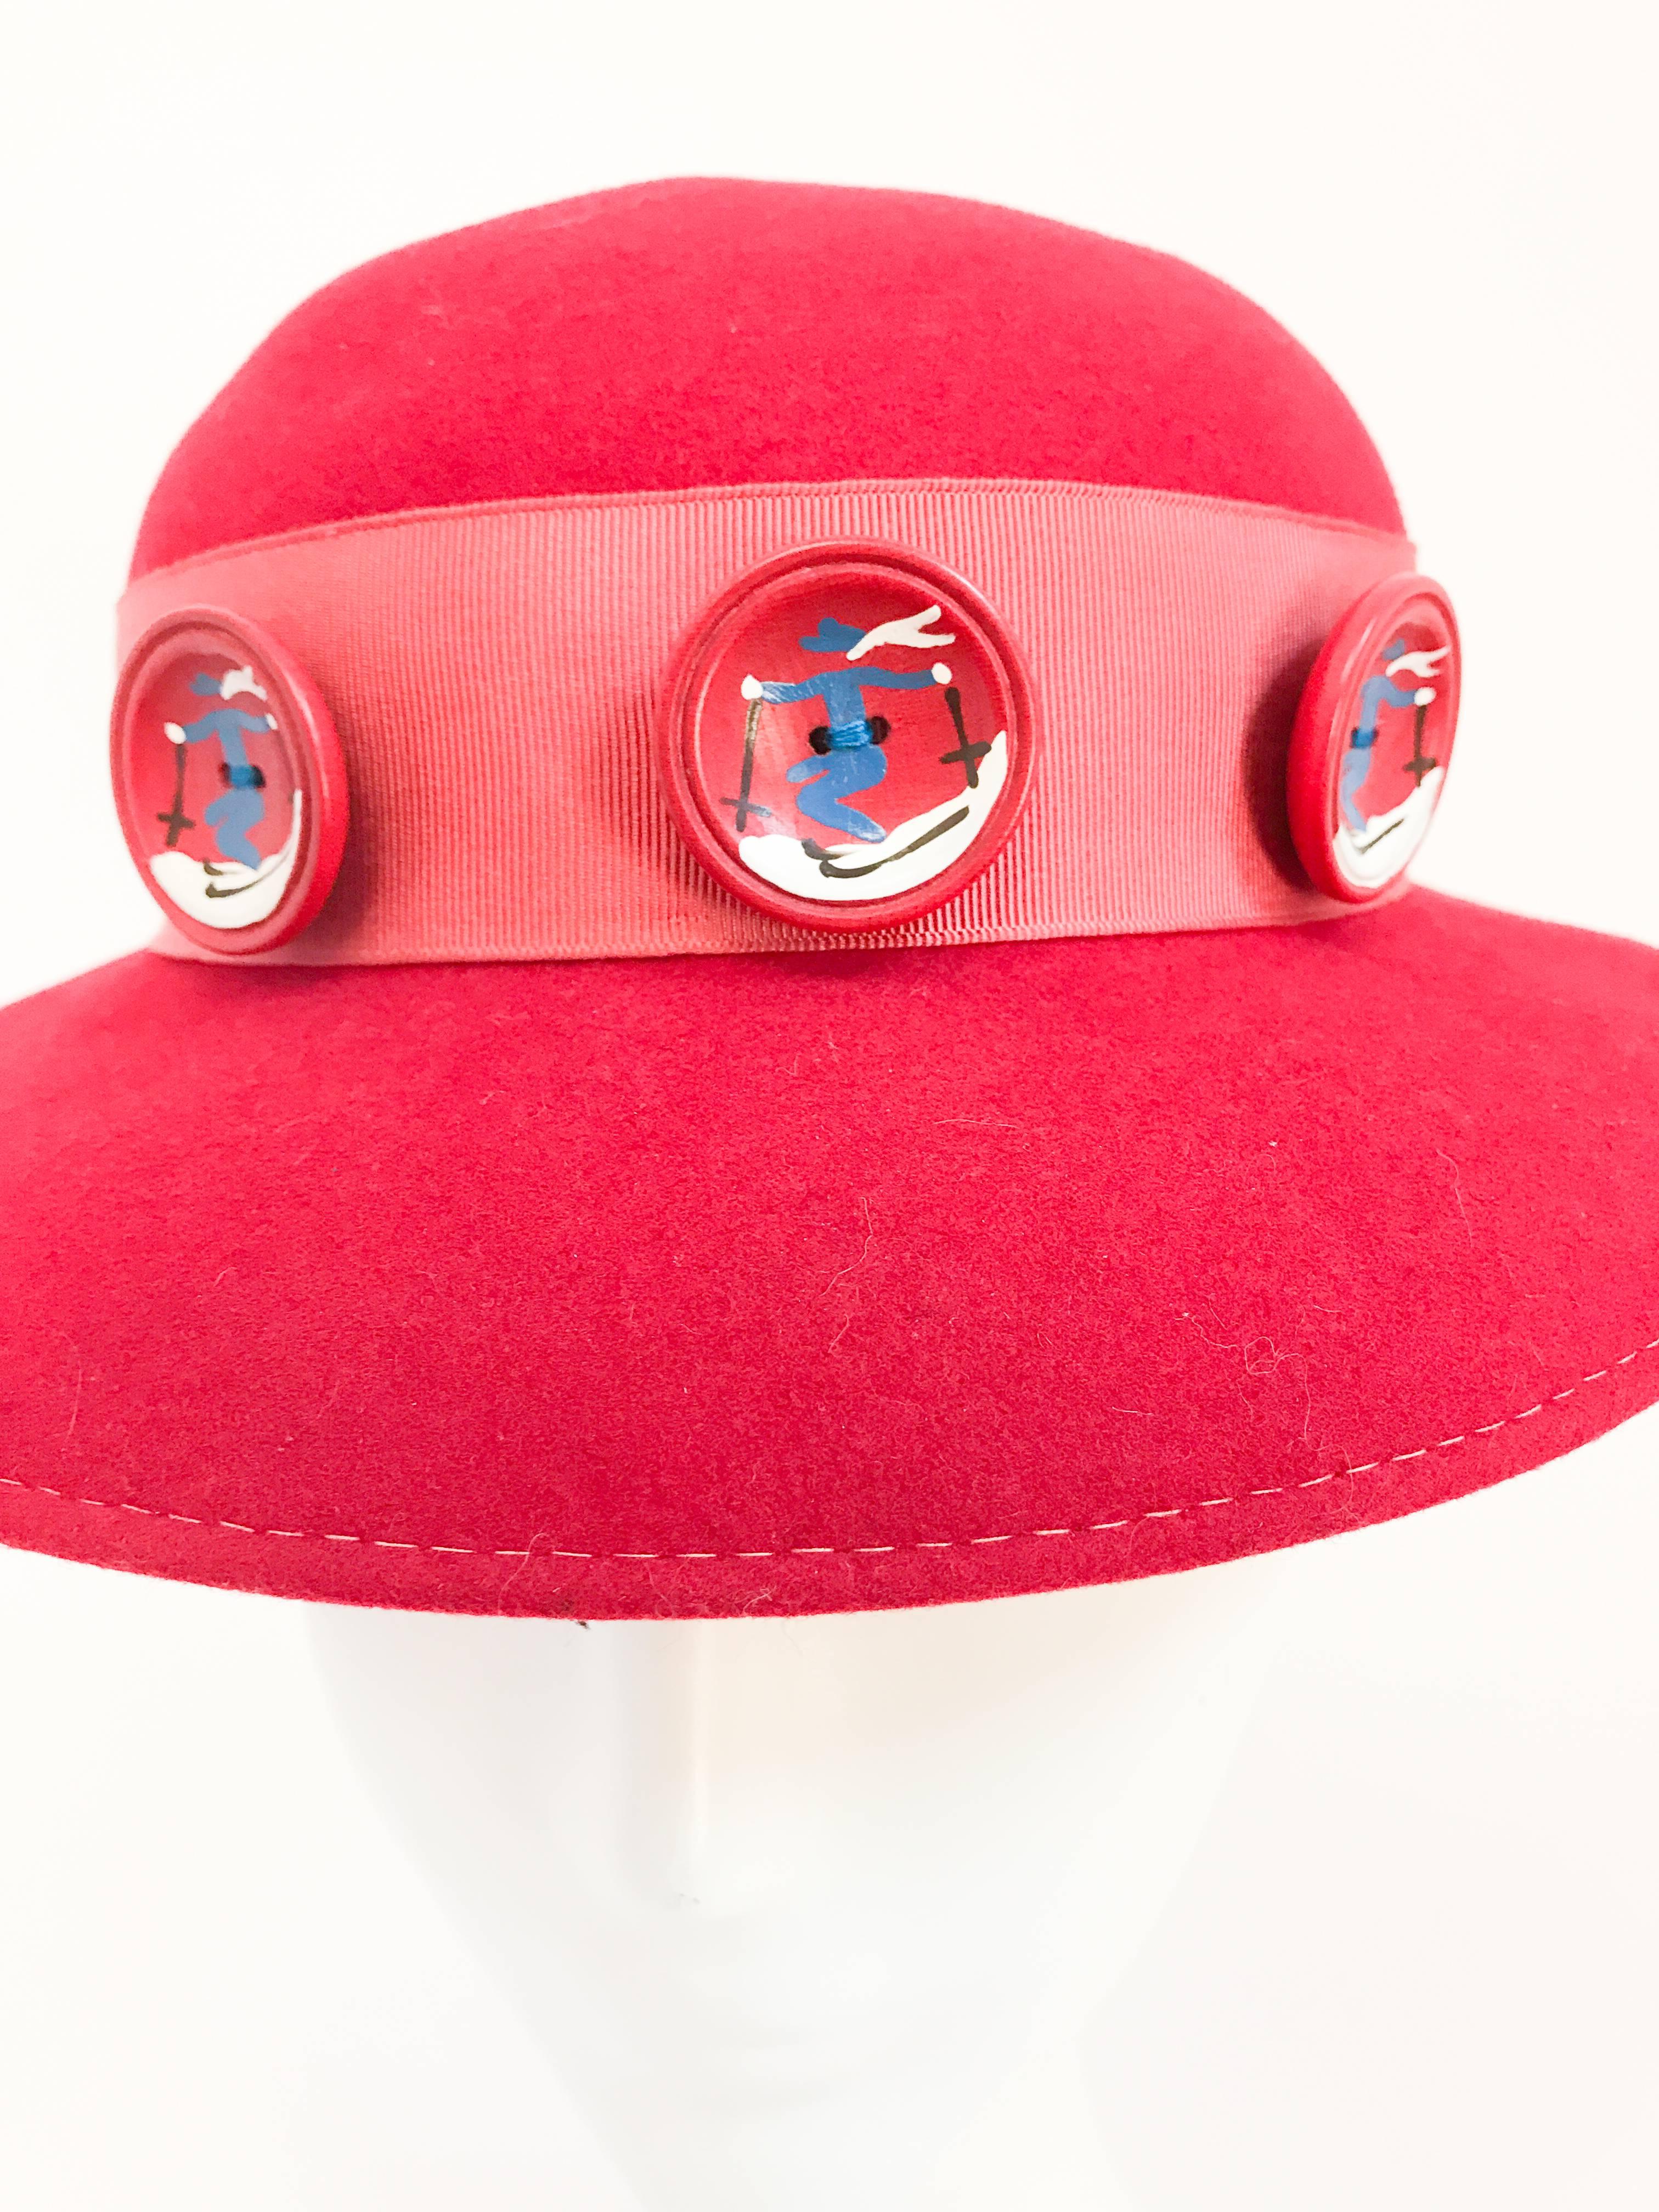 1930s Red Felt hat with Hand Painted Ski Buttons For Sale 1